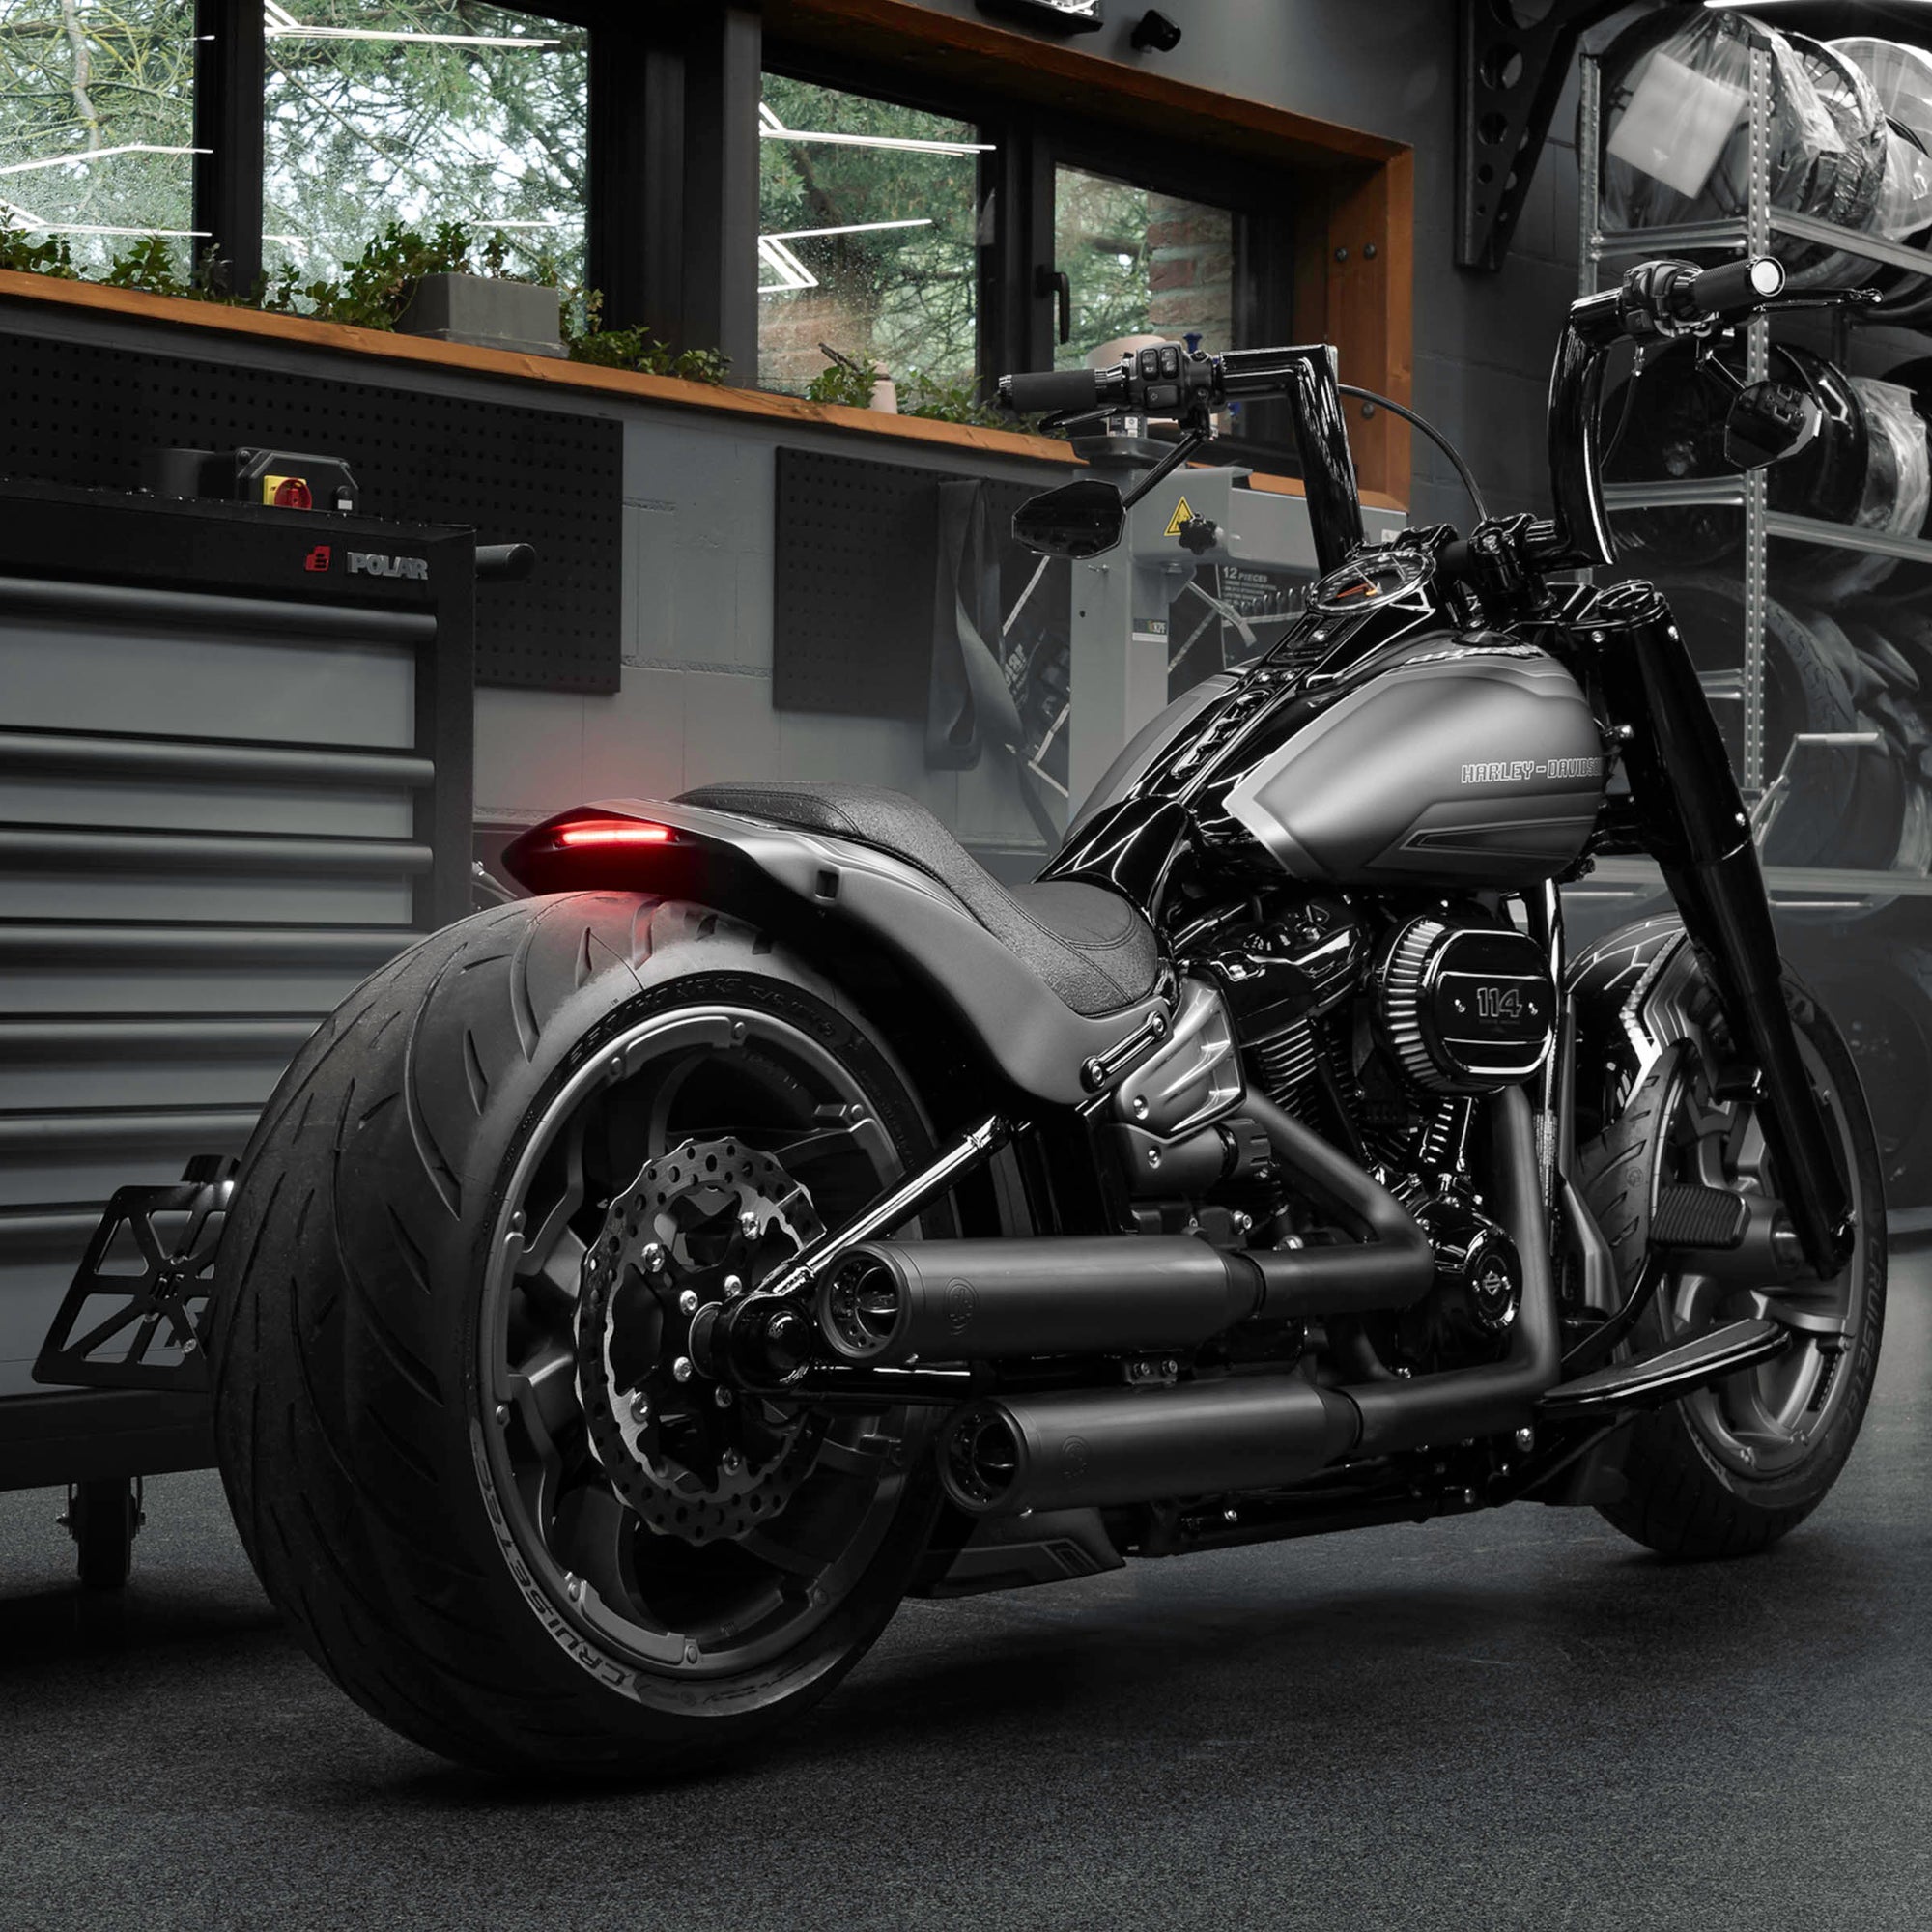 Modified Harley Davidson Fat Boy motorcycle with Killer Custom parts from the rear in a modern bike shop